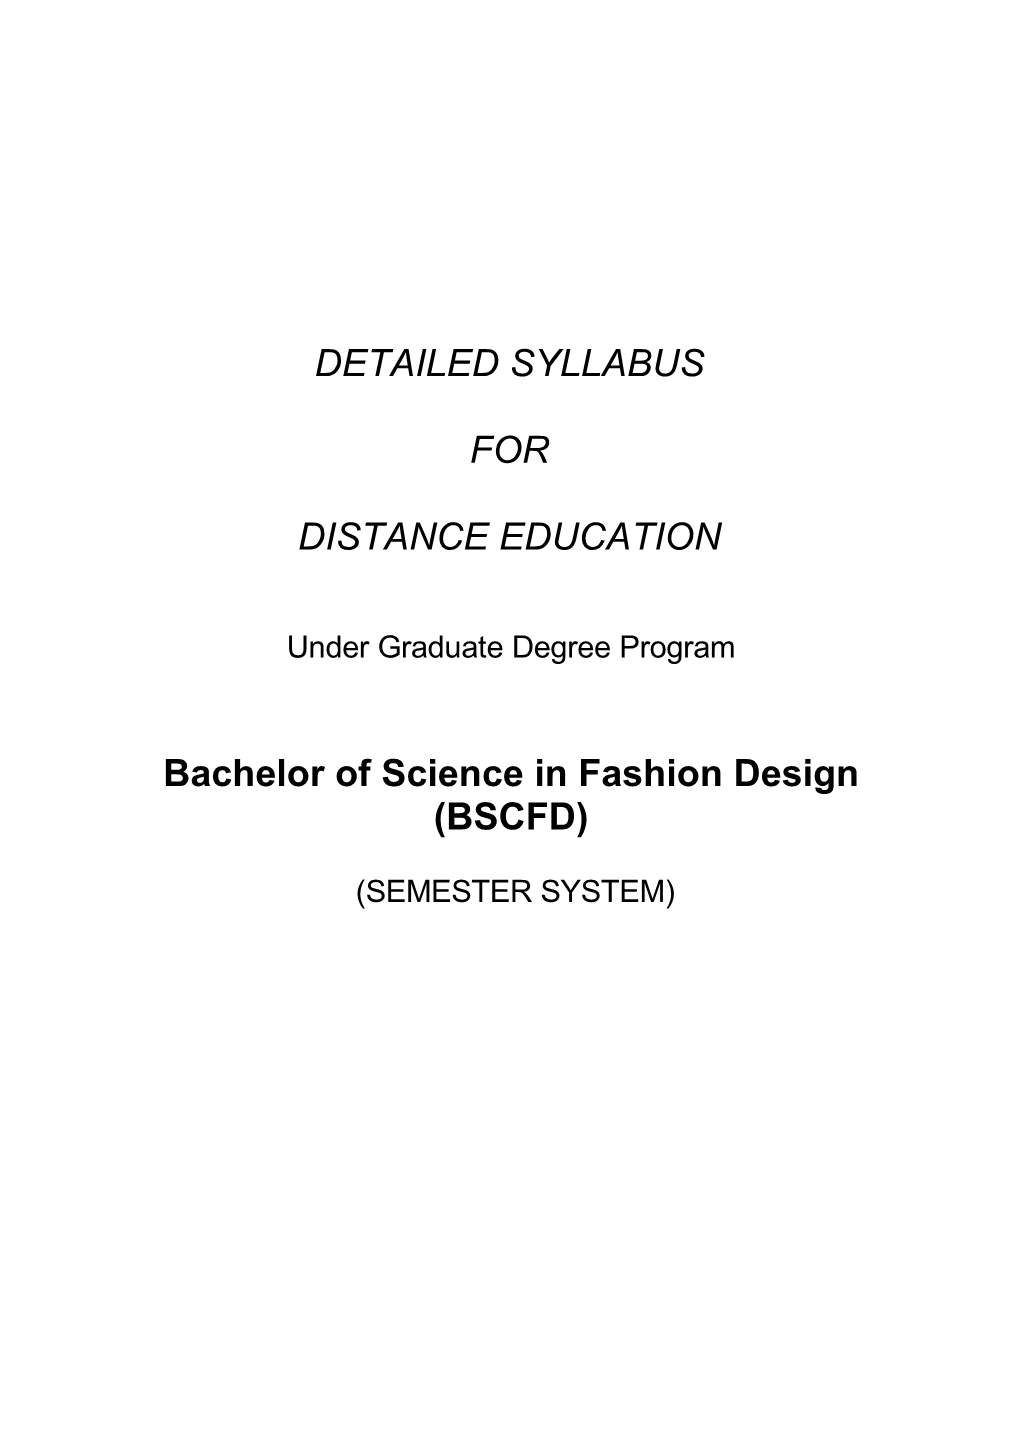 DETAILED SYLLABUS for DISTANCE EDUCATION Bachelor